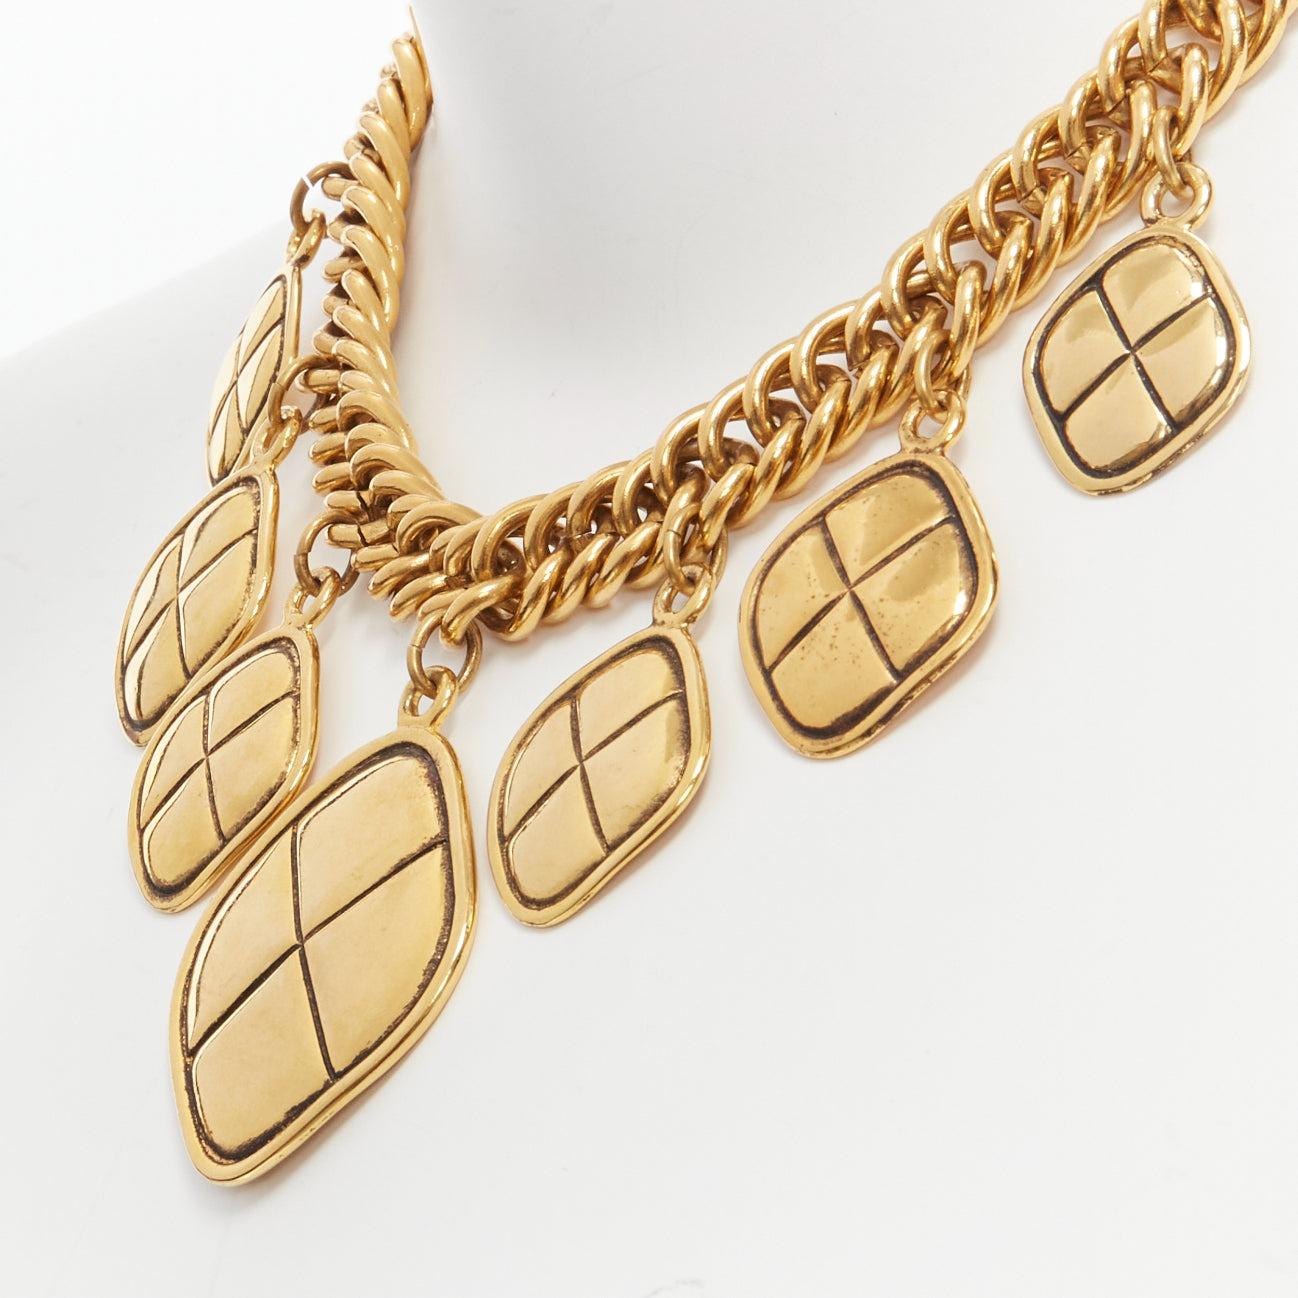 CHANEL Vintage gold quilted Rhombus charm chain choker necklace
Reference: TGAS/D00750
Brand: Chanel
Designer: Karl Lagerfeld
Collection: Circa 1990's
Material: Metal
Color: Gold
Pattern: Solid
Closure: Lobster Clasp
Lining: Gold Metal
Made in: